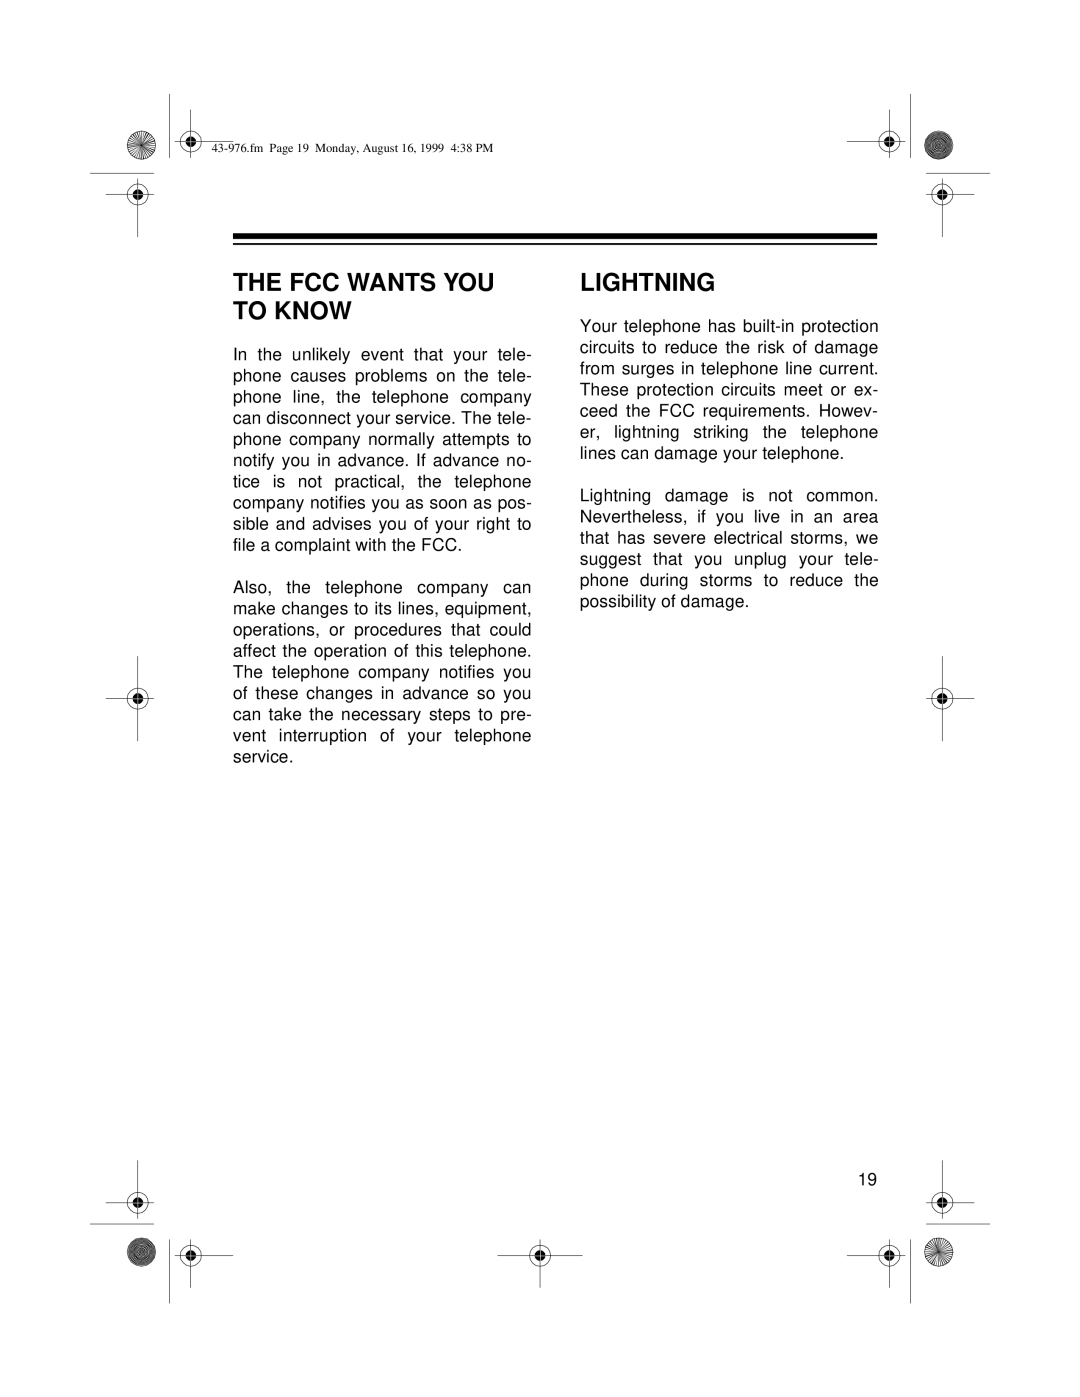 Radio Shack 1500 owner manual The Fcc Wants You To Know, Lightning, fm Page 19 Monday, August 16, 1999 438 PM 